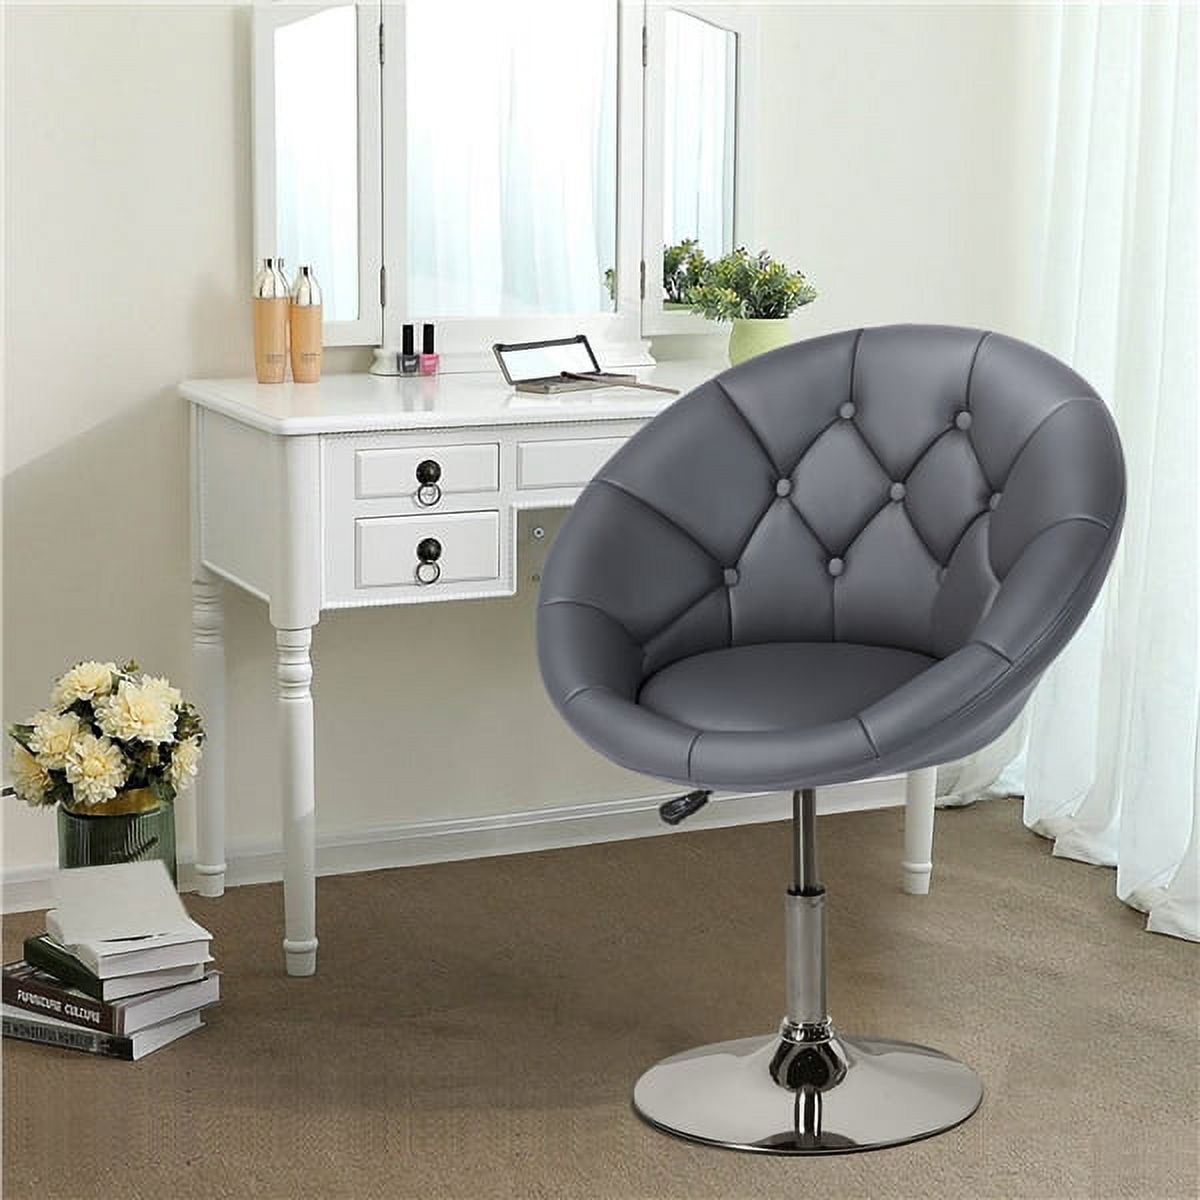 Alden Design Modern Tufted Adjustable Barrel Swivel Accent Chair, Gray Faux Leather - image 1 of 13